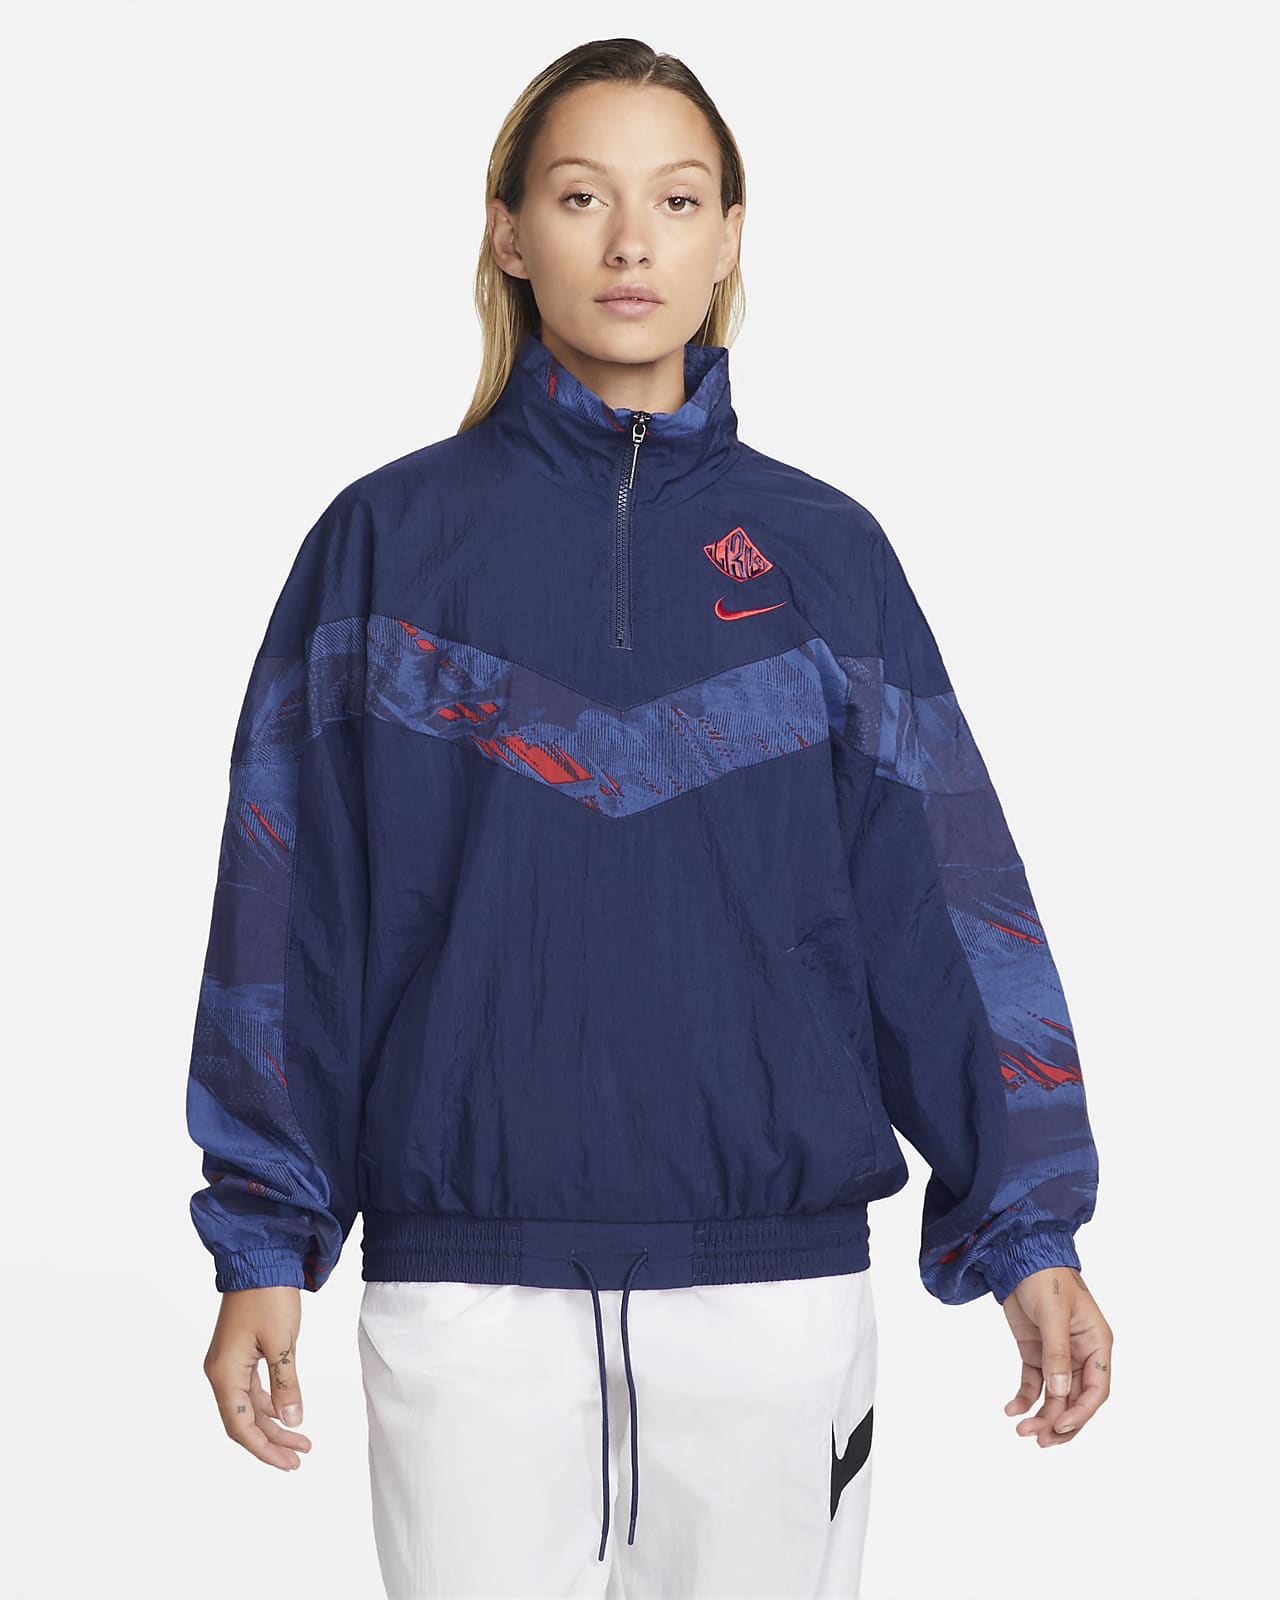 England Women's Pullover Woven Jacket